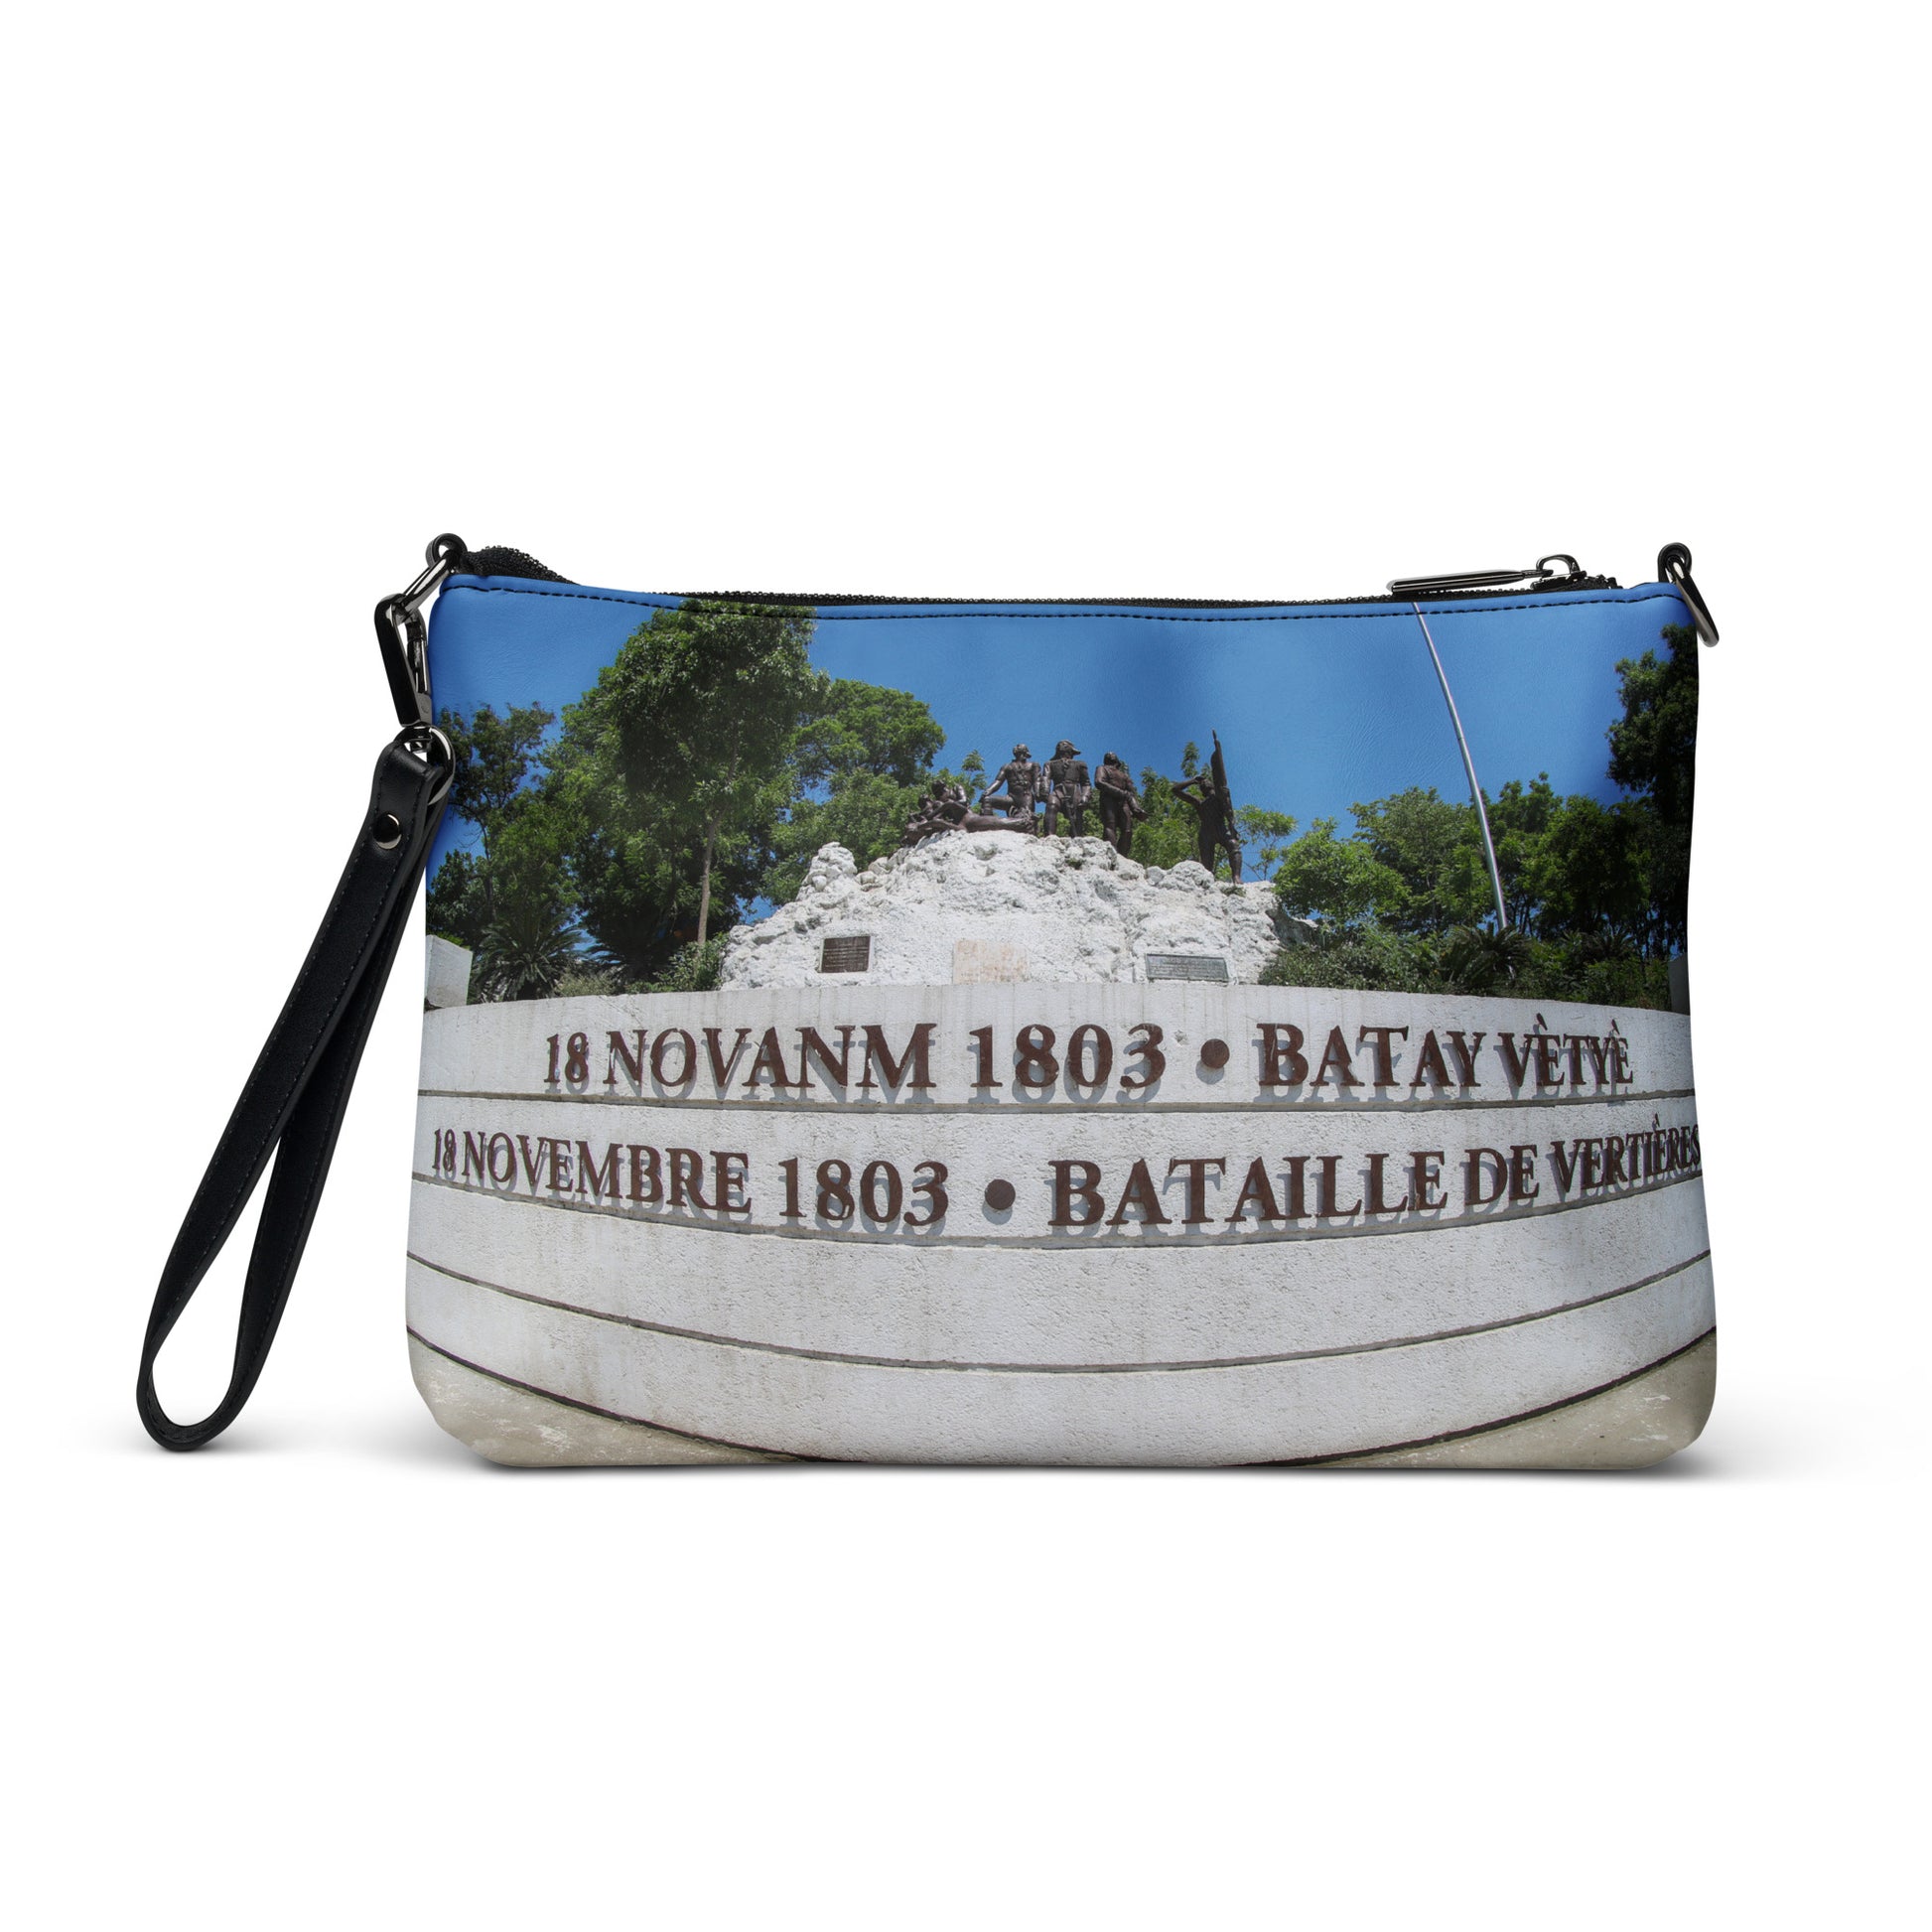 crossbody-crossbodybag-Monument to the heroes of the Battle of Vertières-historical monument-théo gallery expo-théo photography  haiti